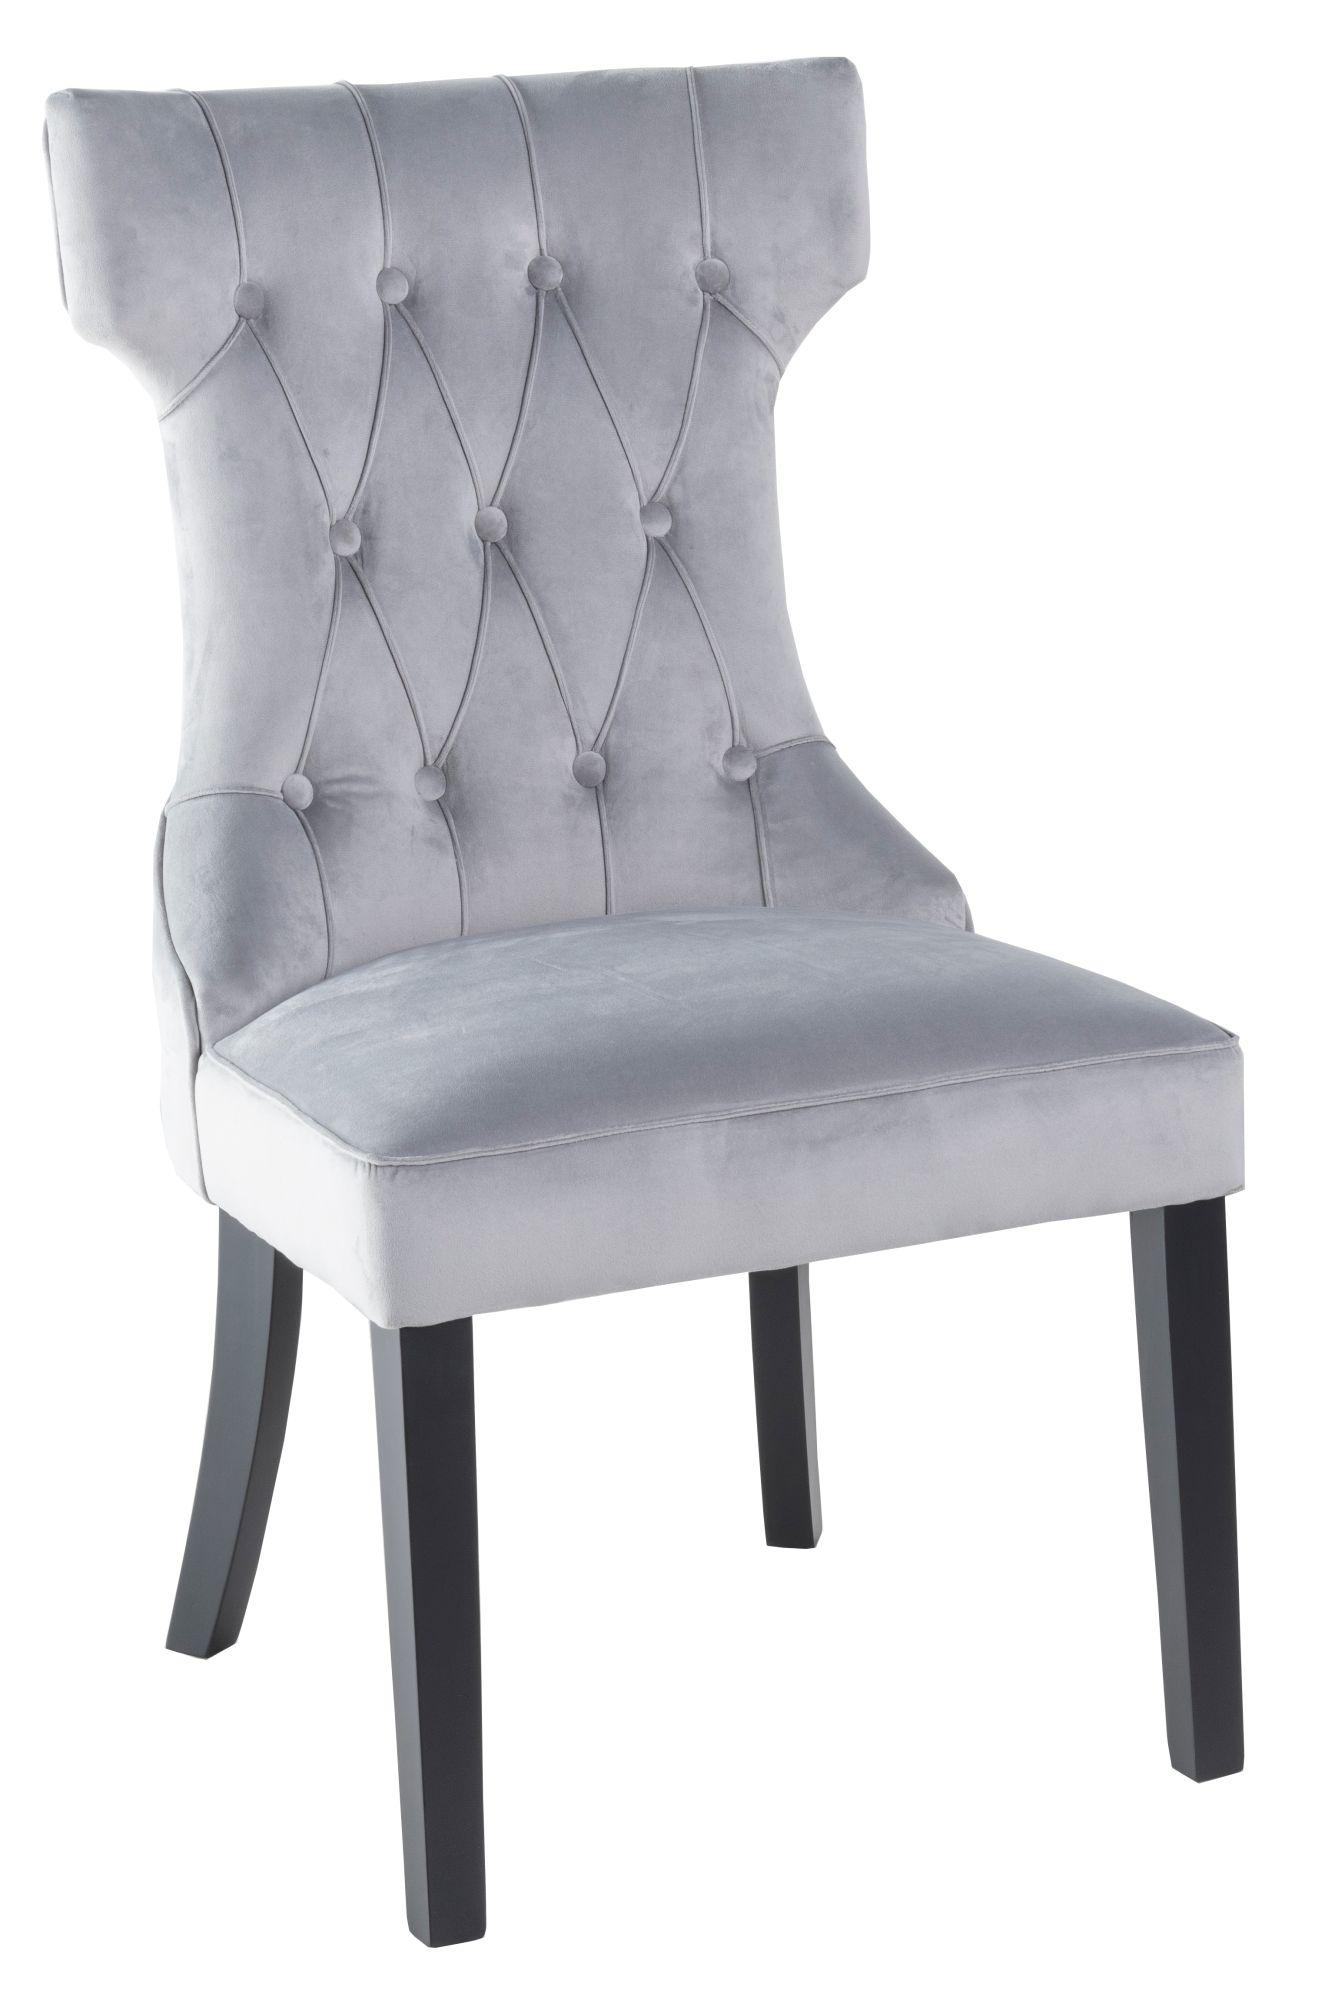 Courtney Light Grey Dining Chair, Tufted Velvet Fabric Upholstered with Black Wooden Legs